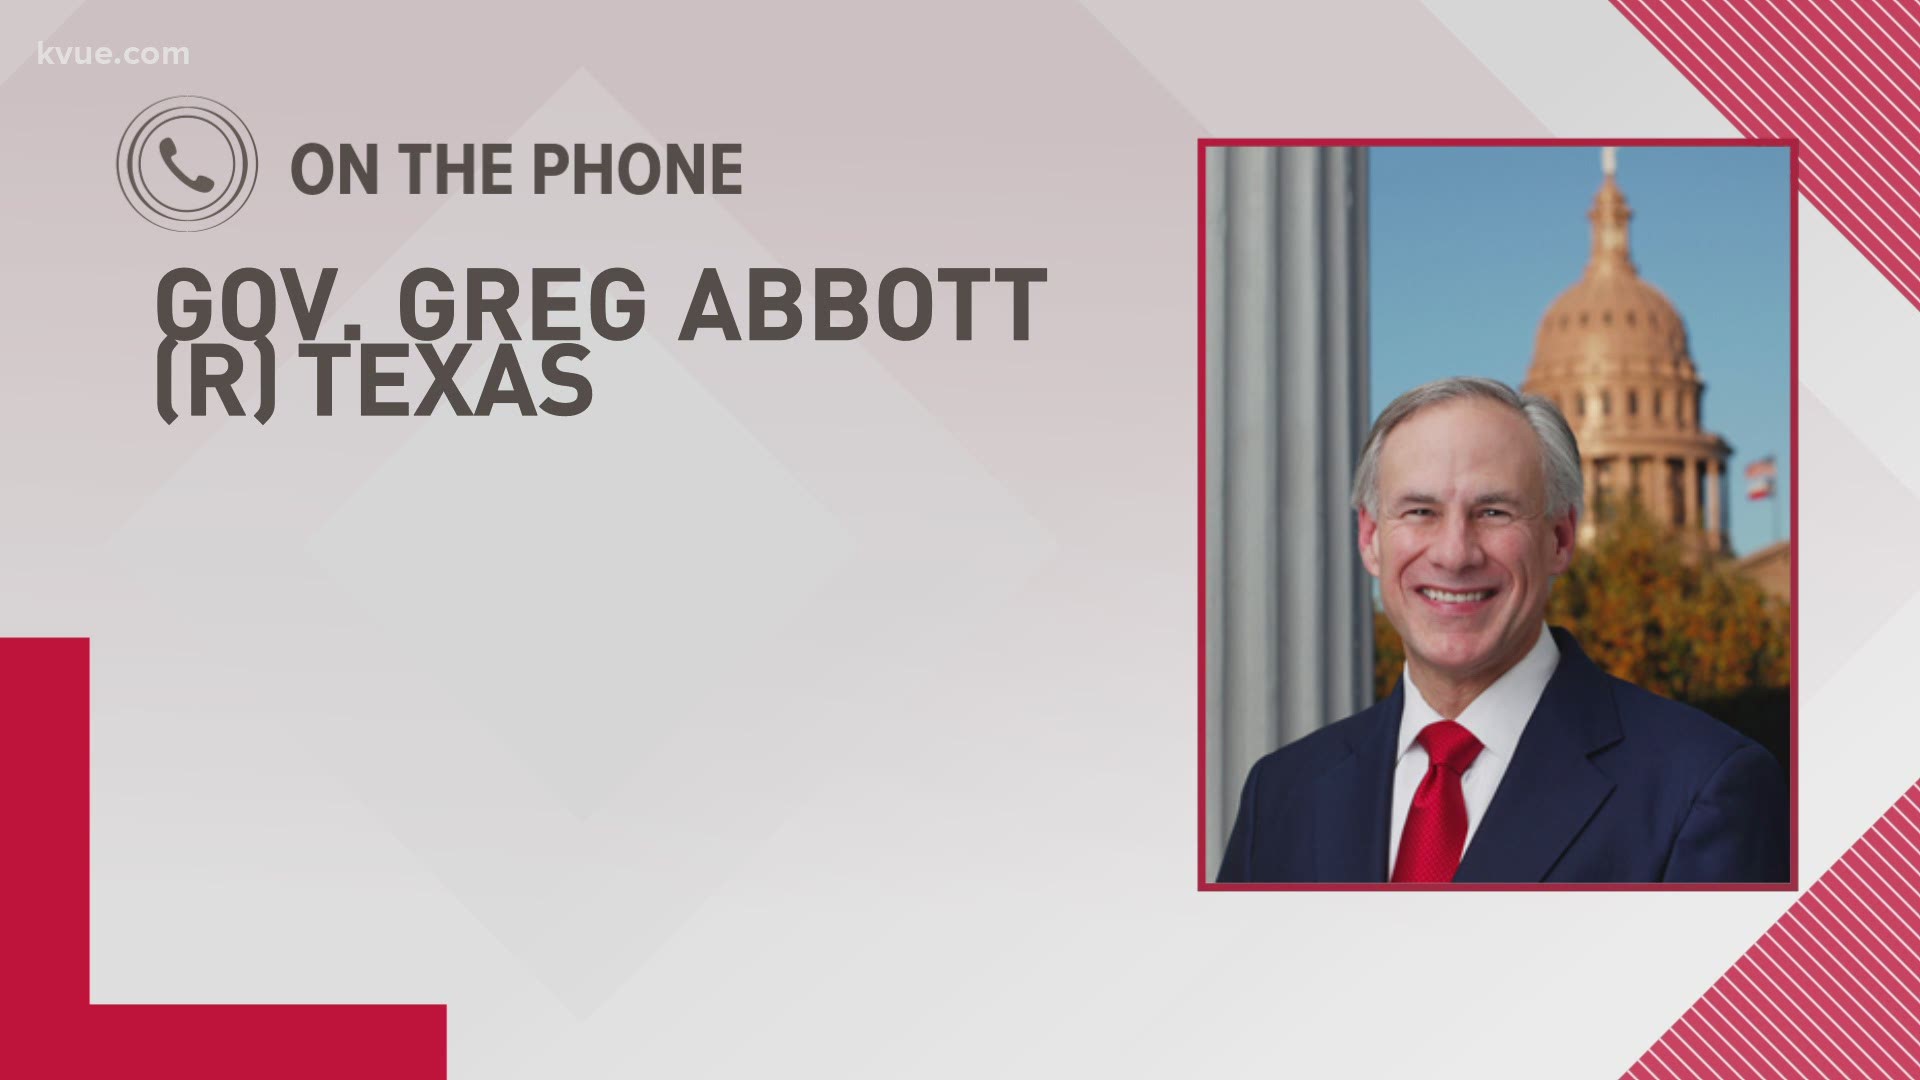 Gov. Greg Abbott joined KVUE on Feb. 15 to discuss statewide power outages as an extreme cold snap hits Texas.